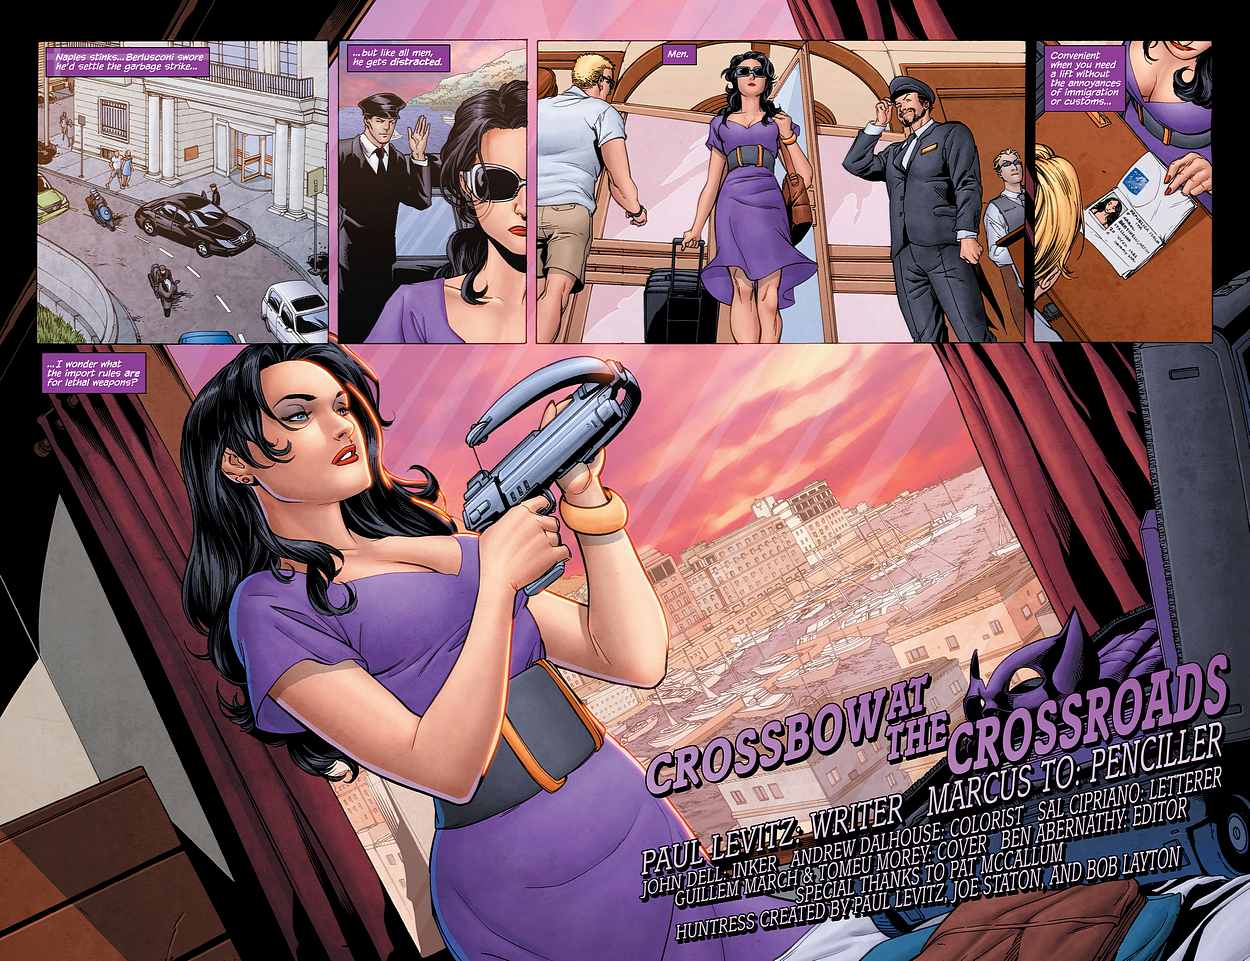 Preview from Huntress #1